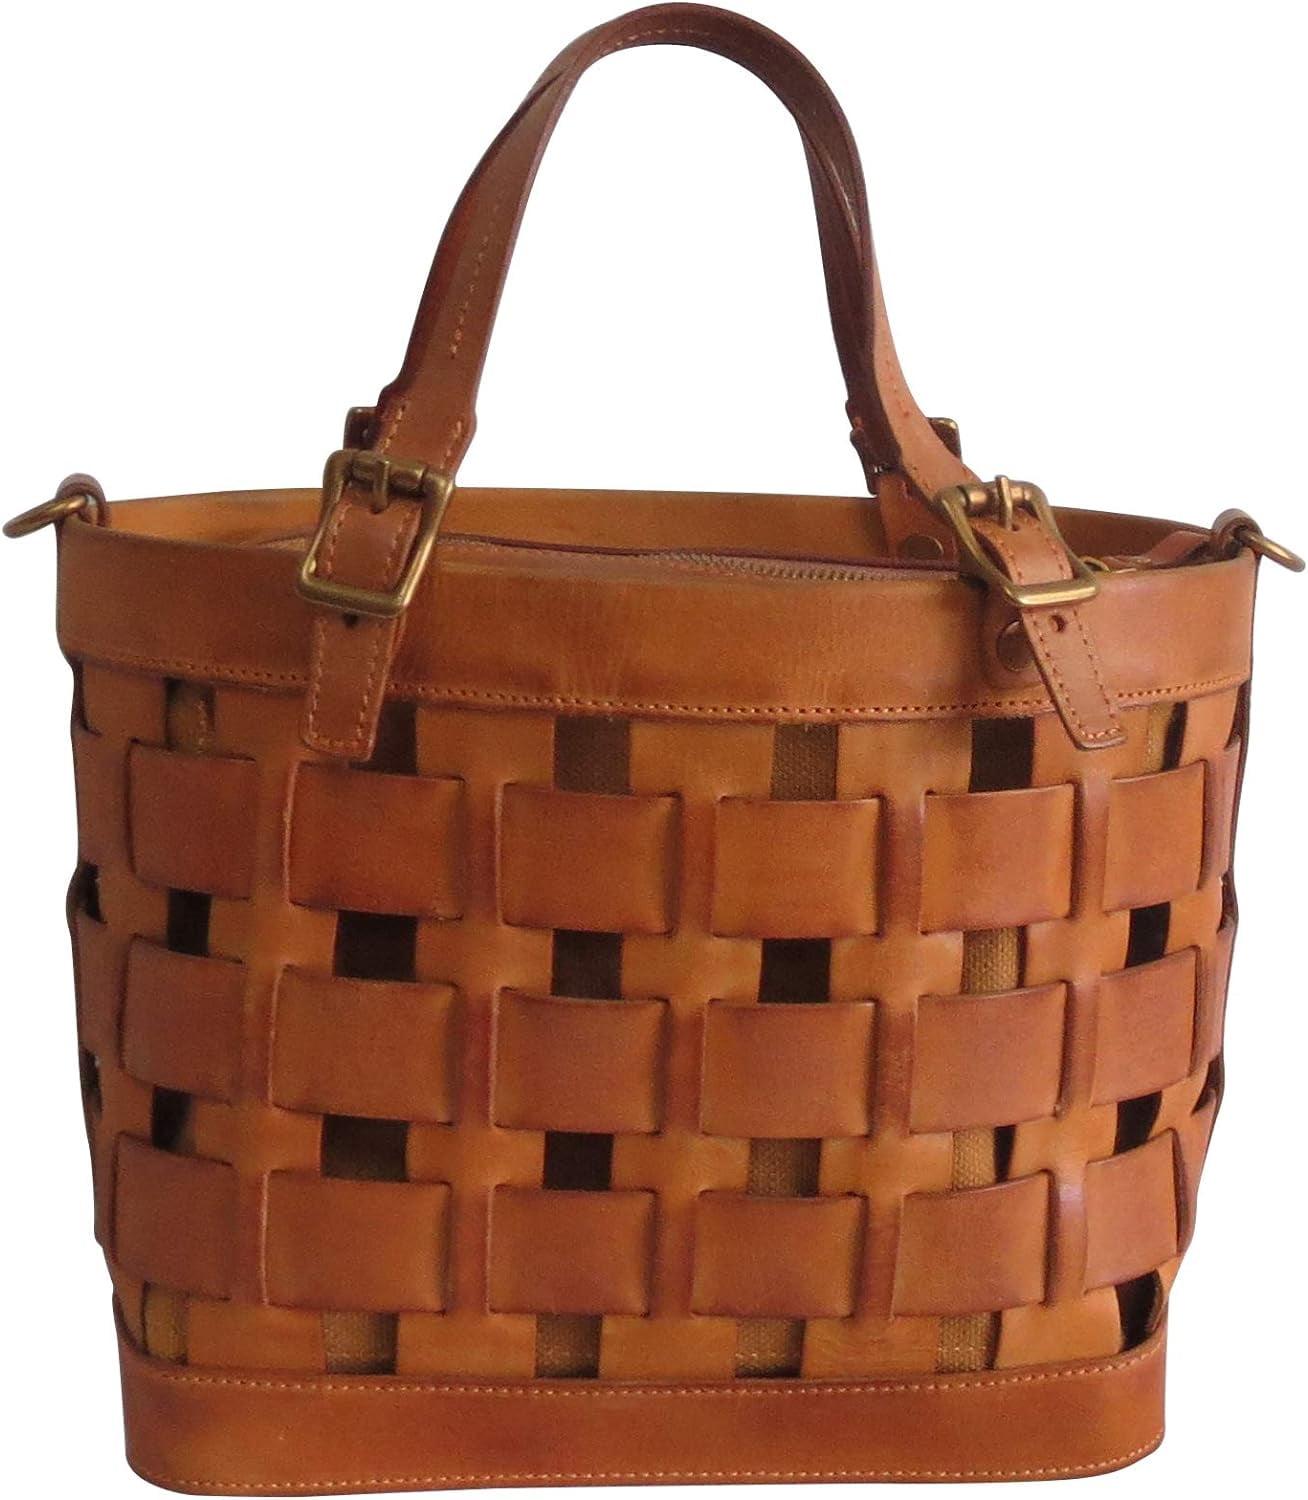 BAM. These Basket Bags Need to Be Hangin' on Your Arm This Summer